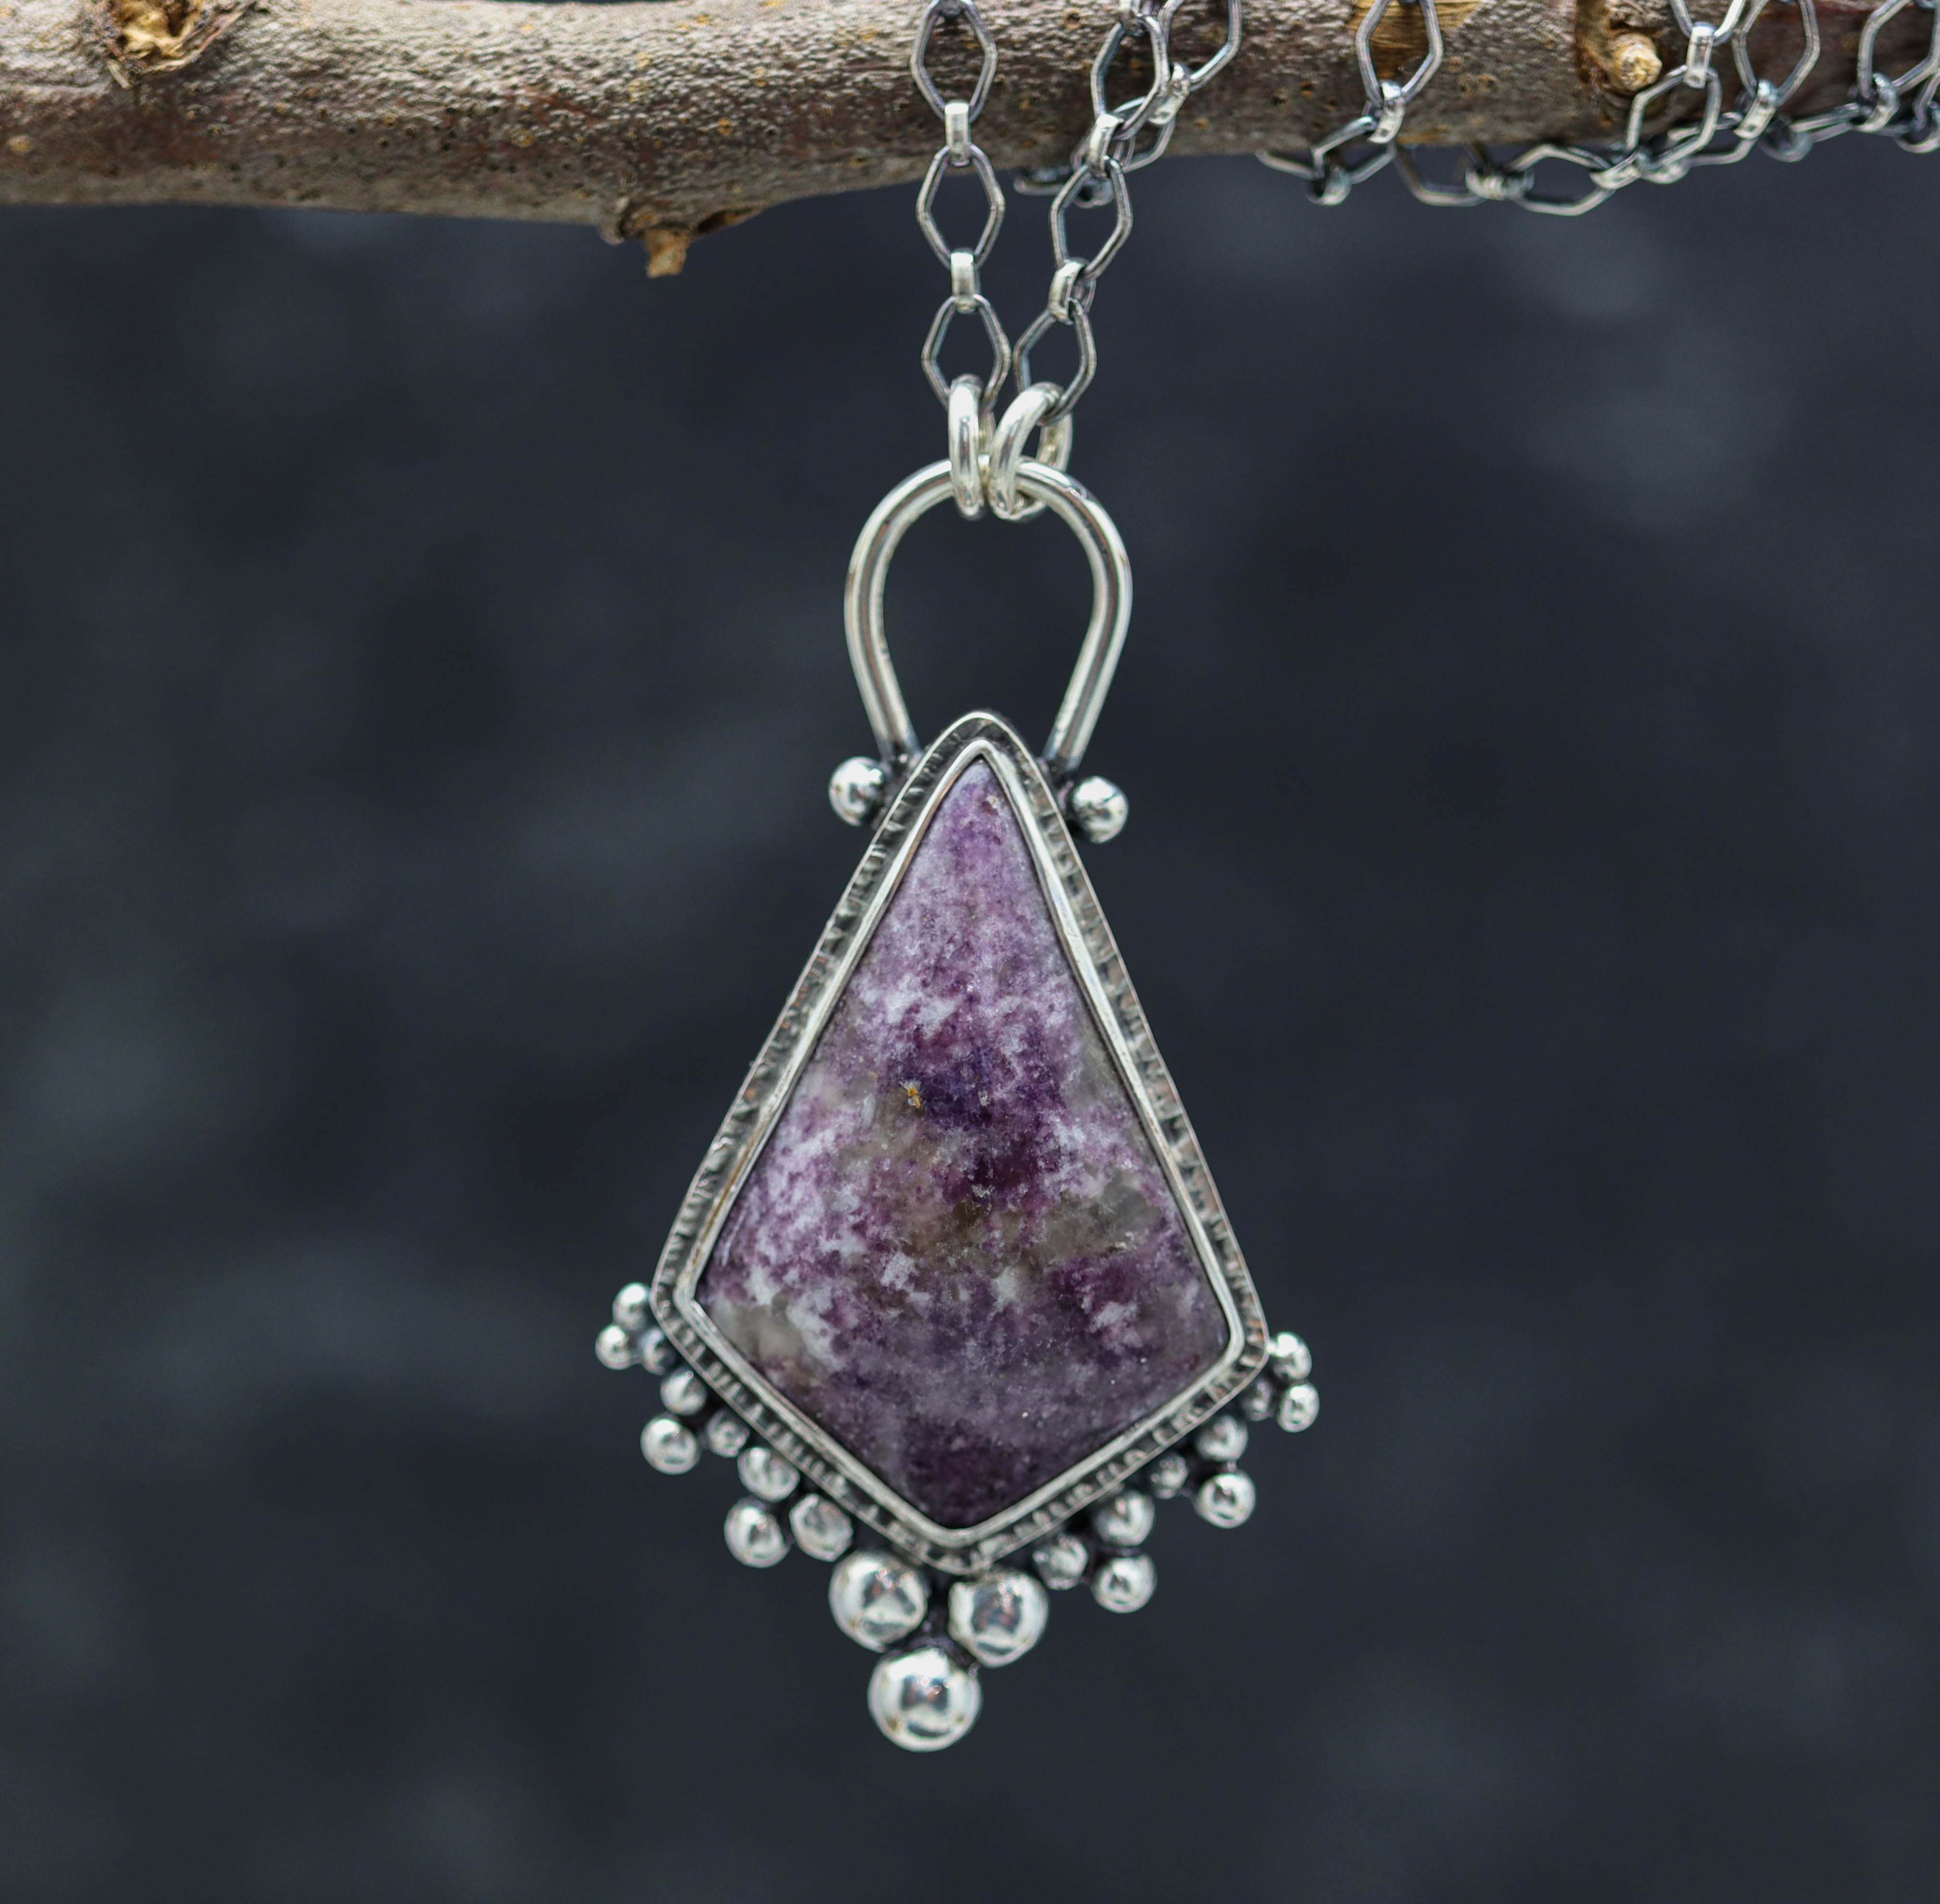 Purple Lepidolite Pendant Sterling Silver One Of a Kind Gemstone Necklace